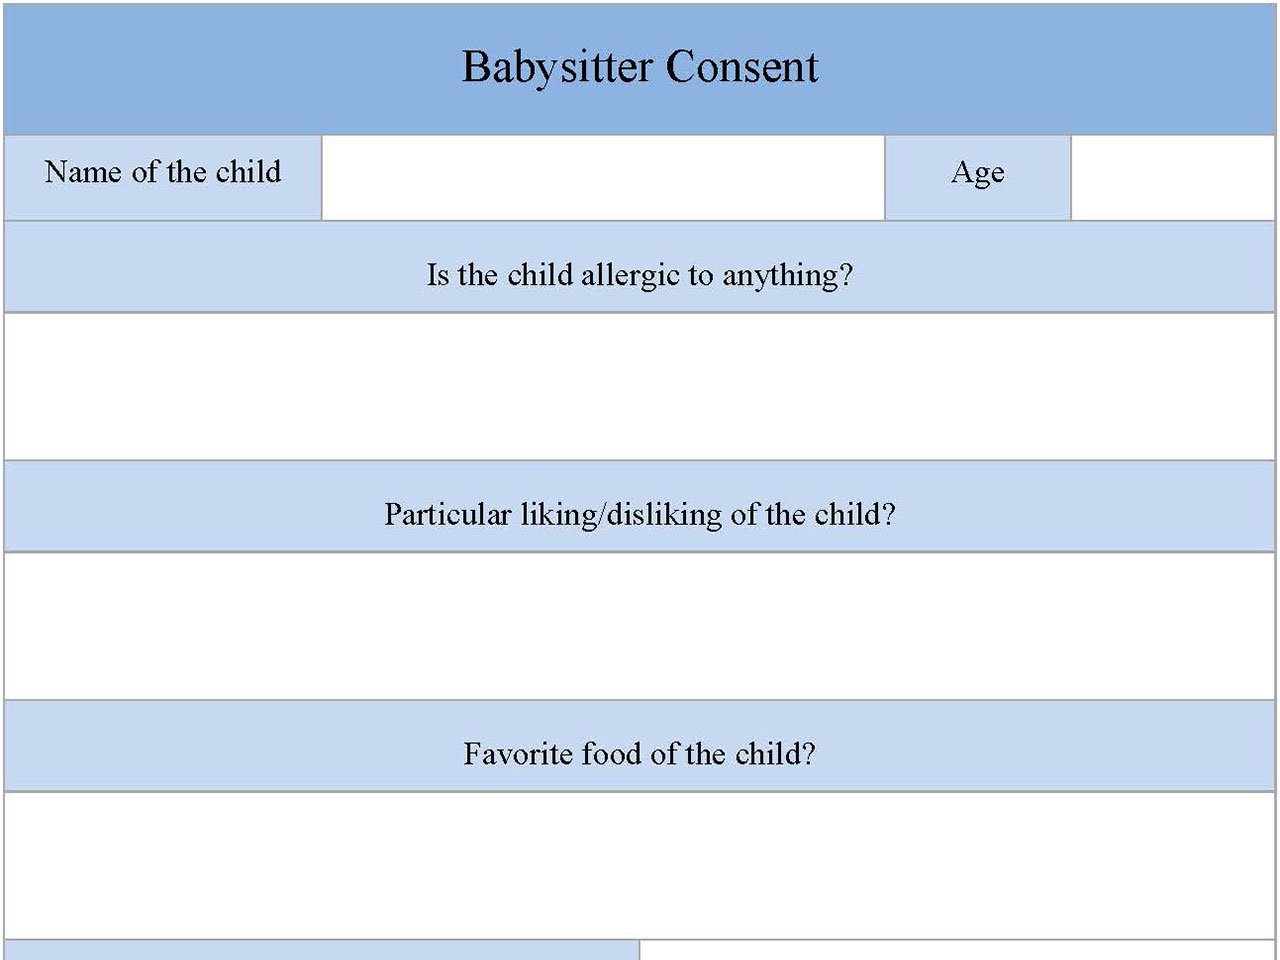 Babysitter consent forms